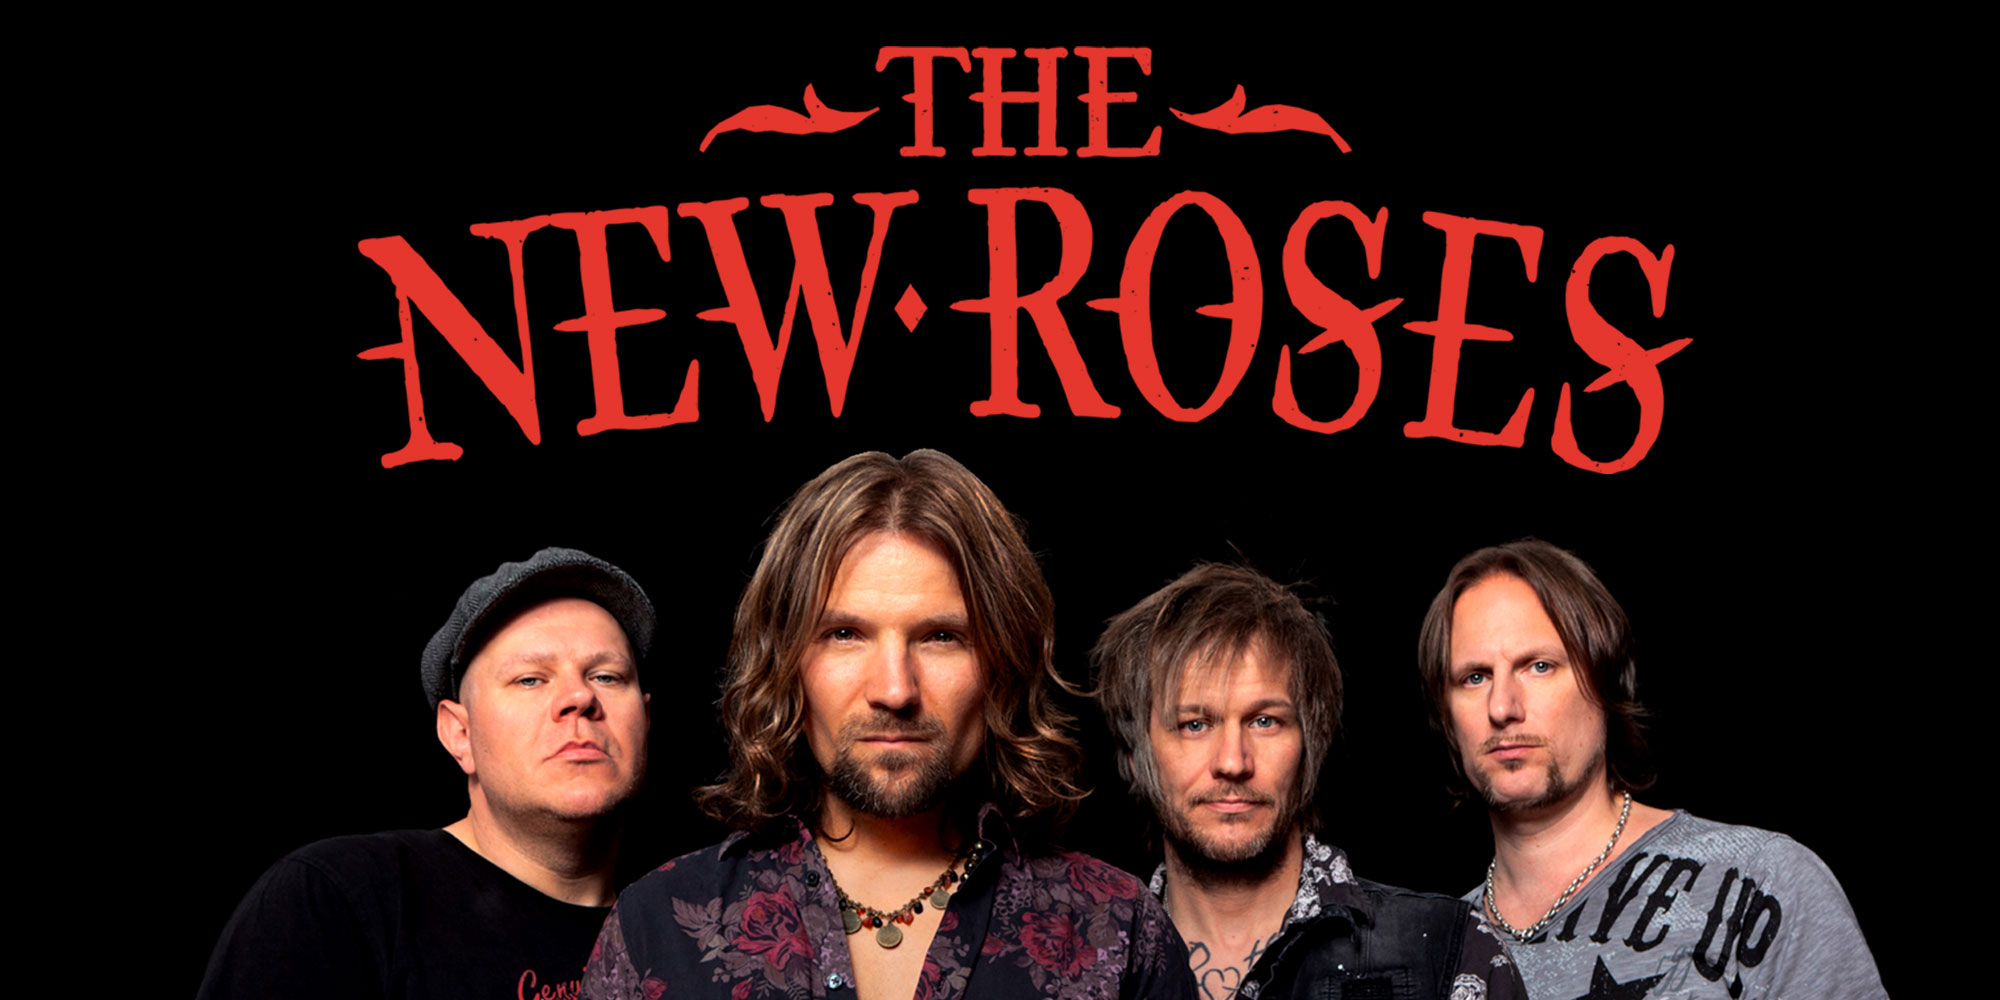 The New Roses - Colos-Saal Aschffenburg 22.10.2022